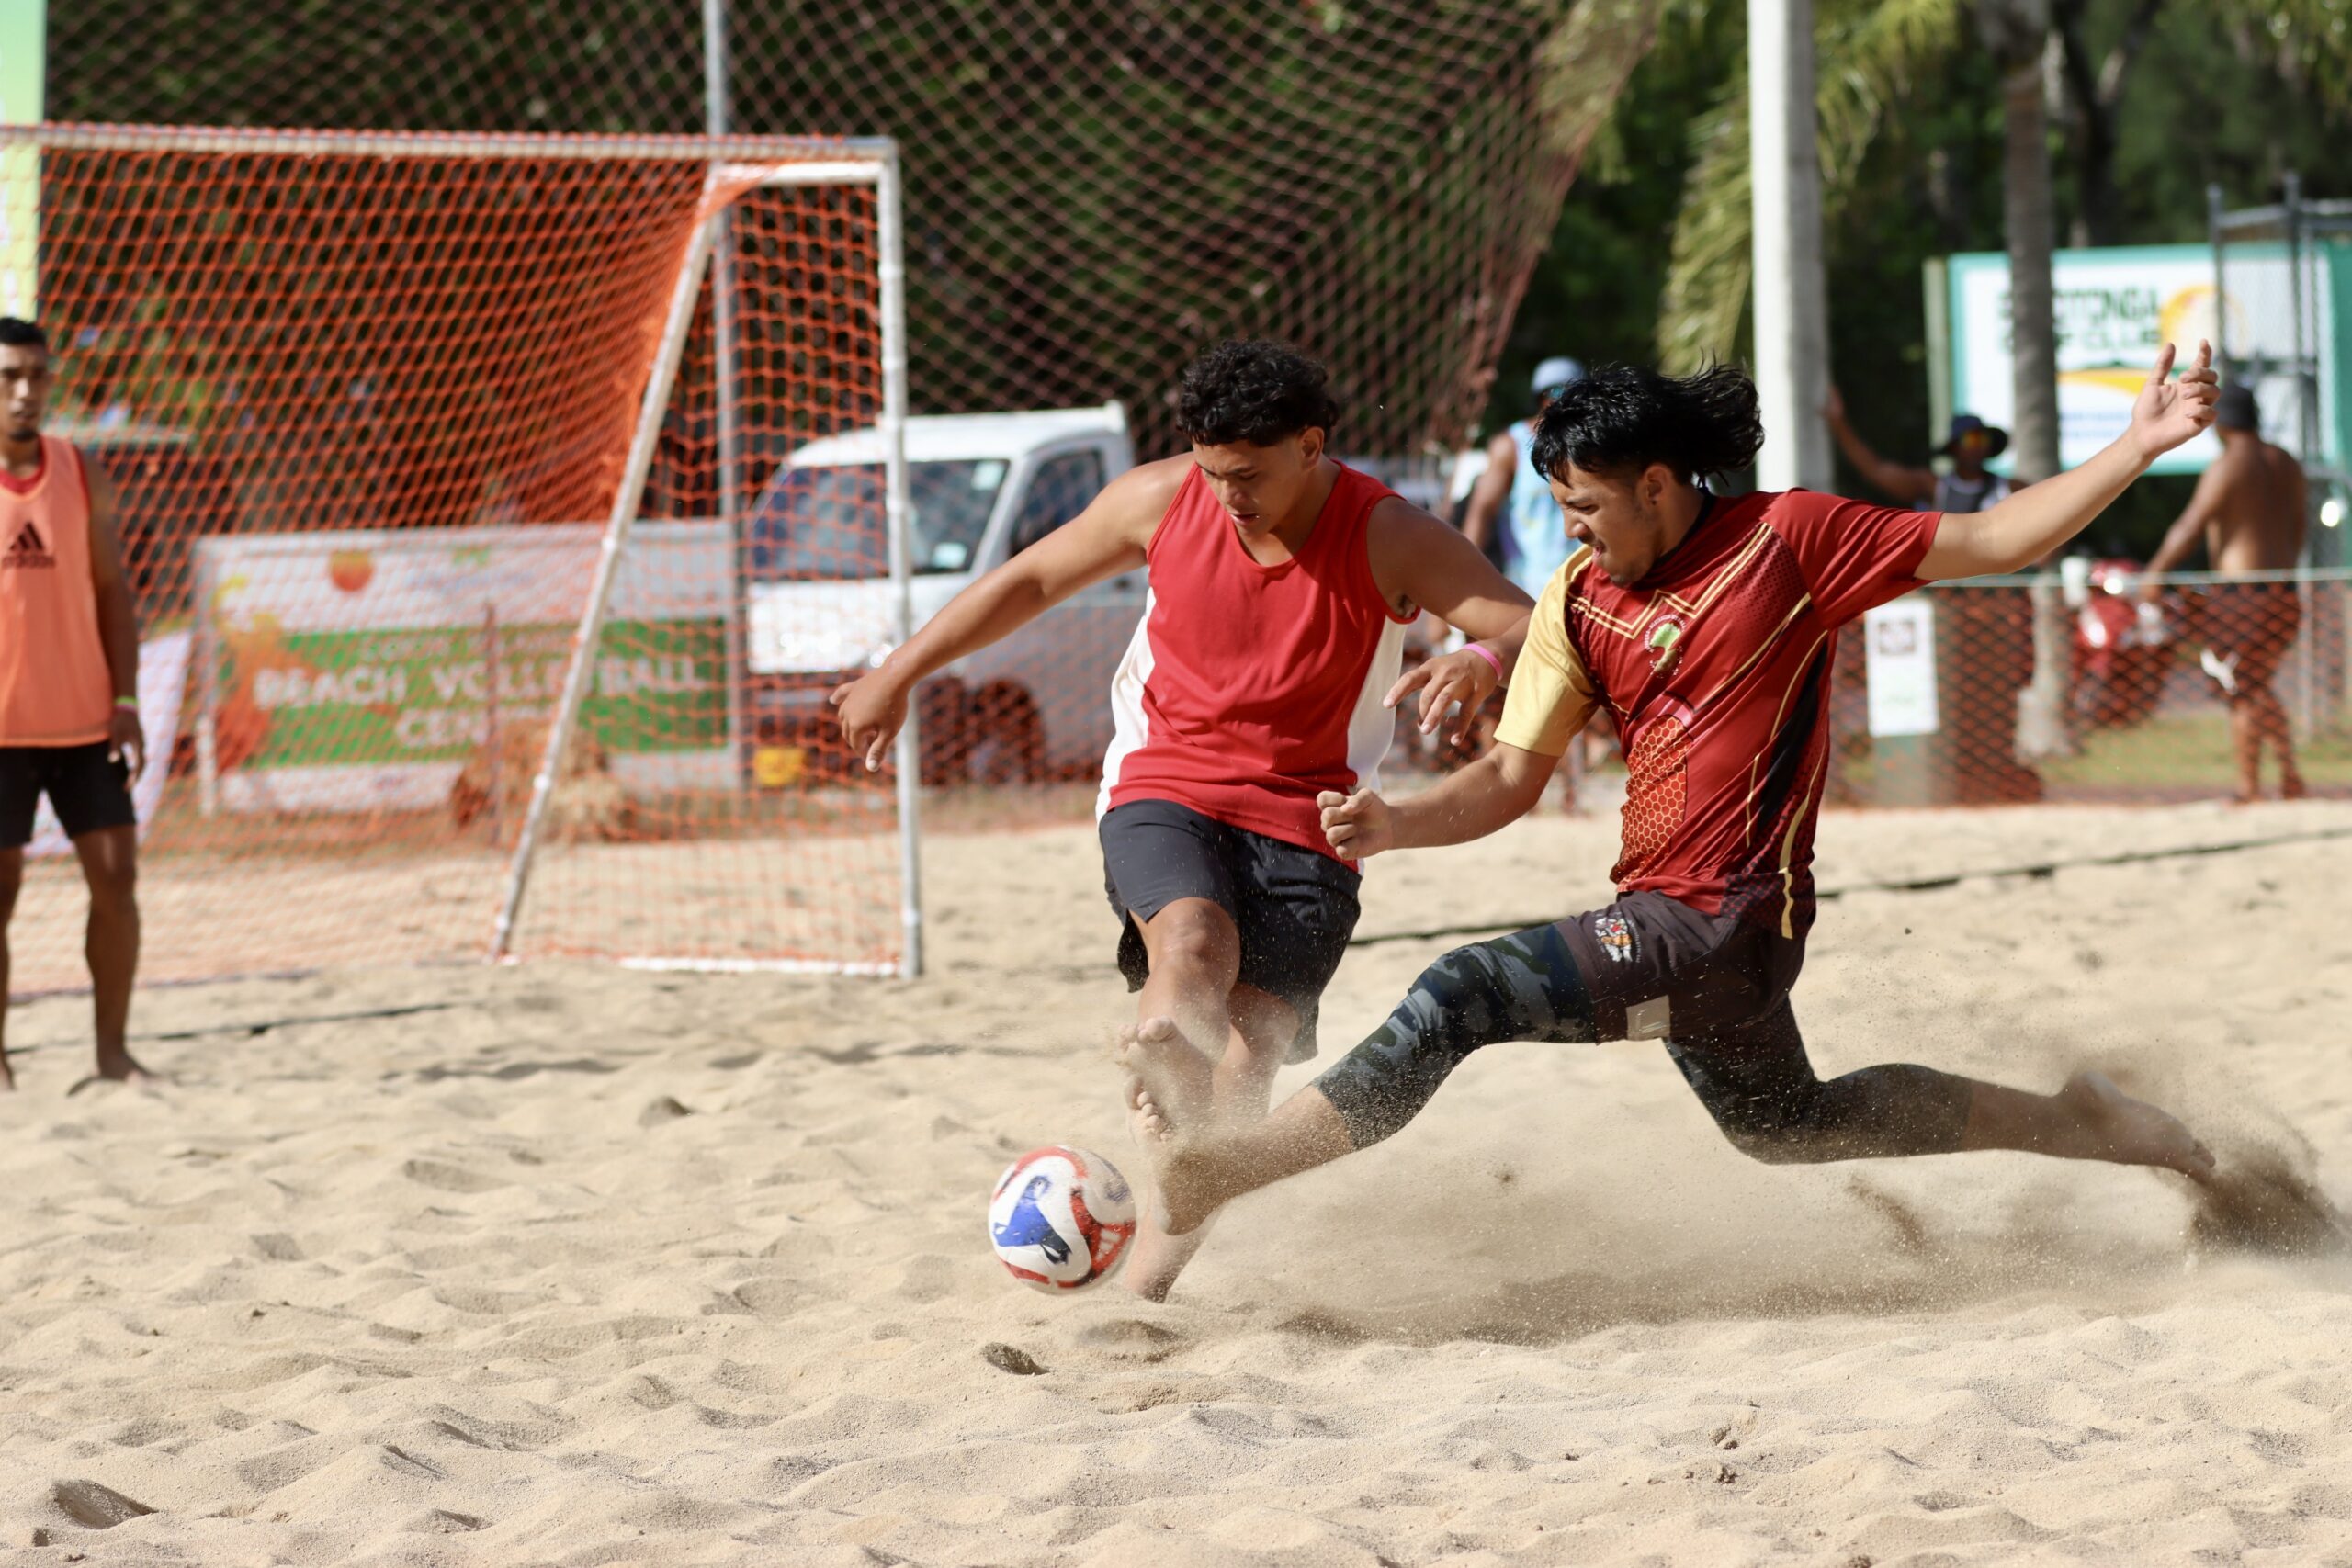 Sand-sational! Beach football takes centre stage at Beach Games